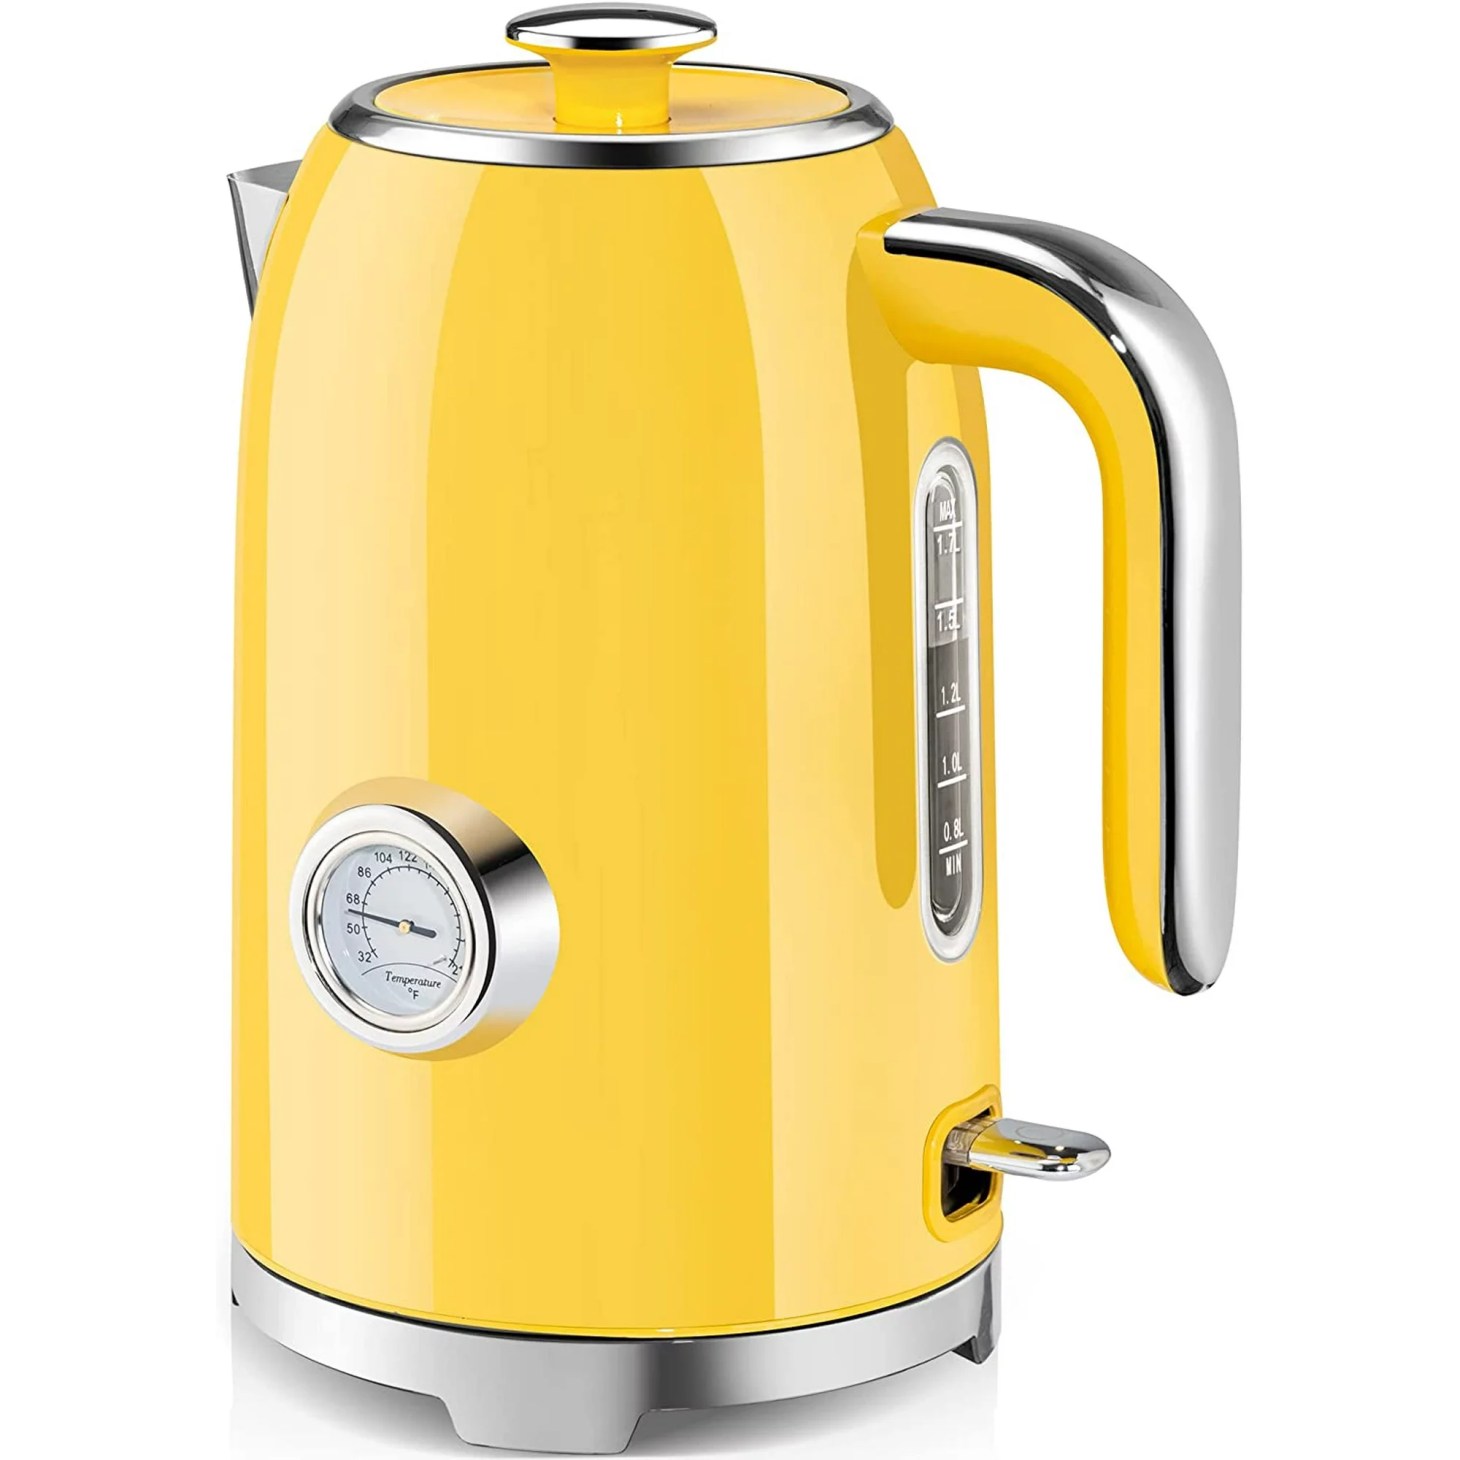 a yellow retro susteas electric kettle